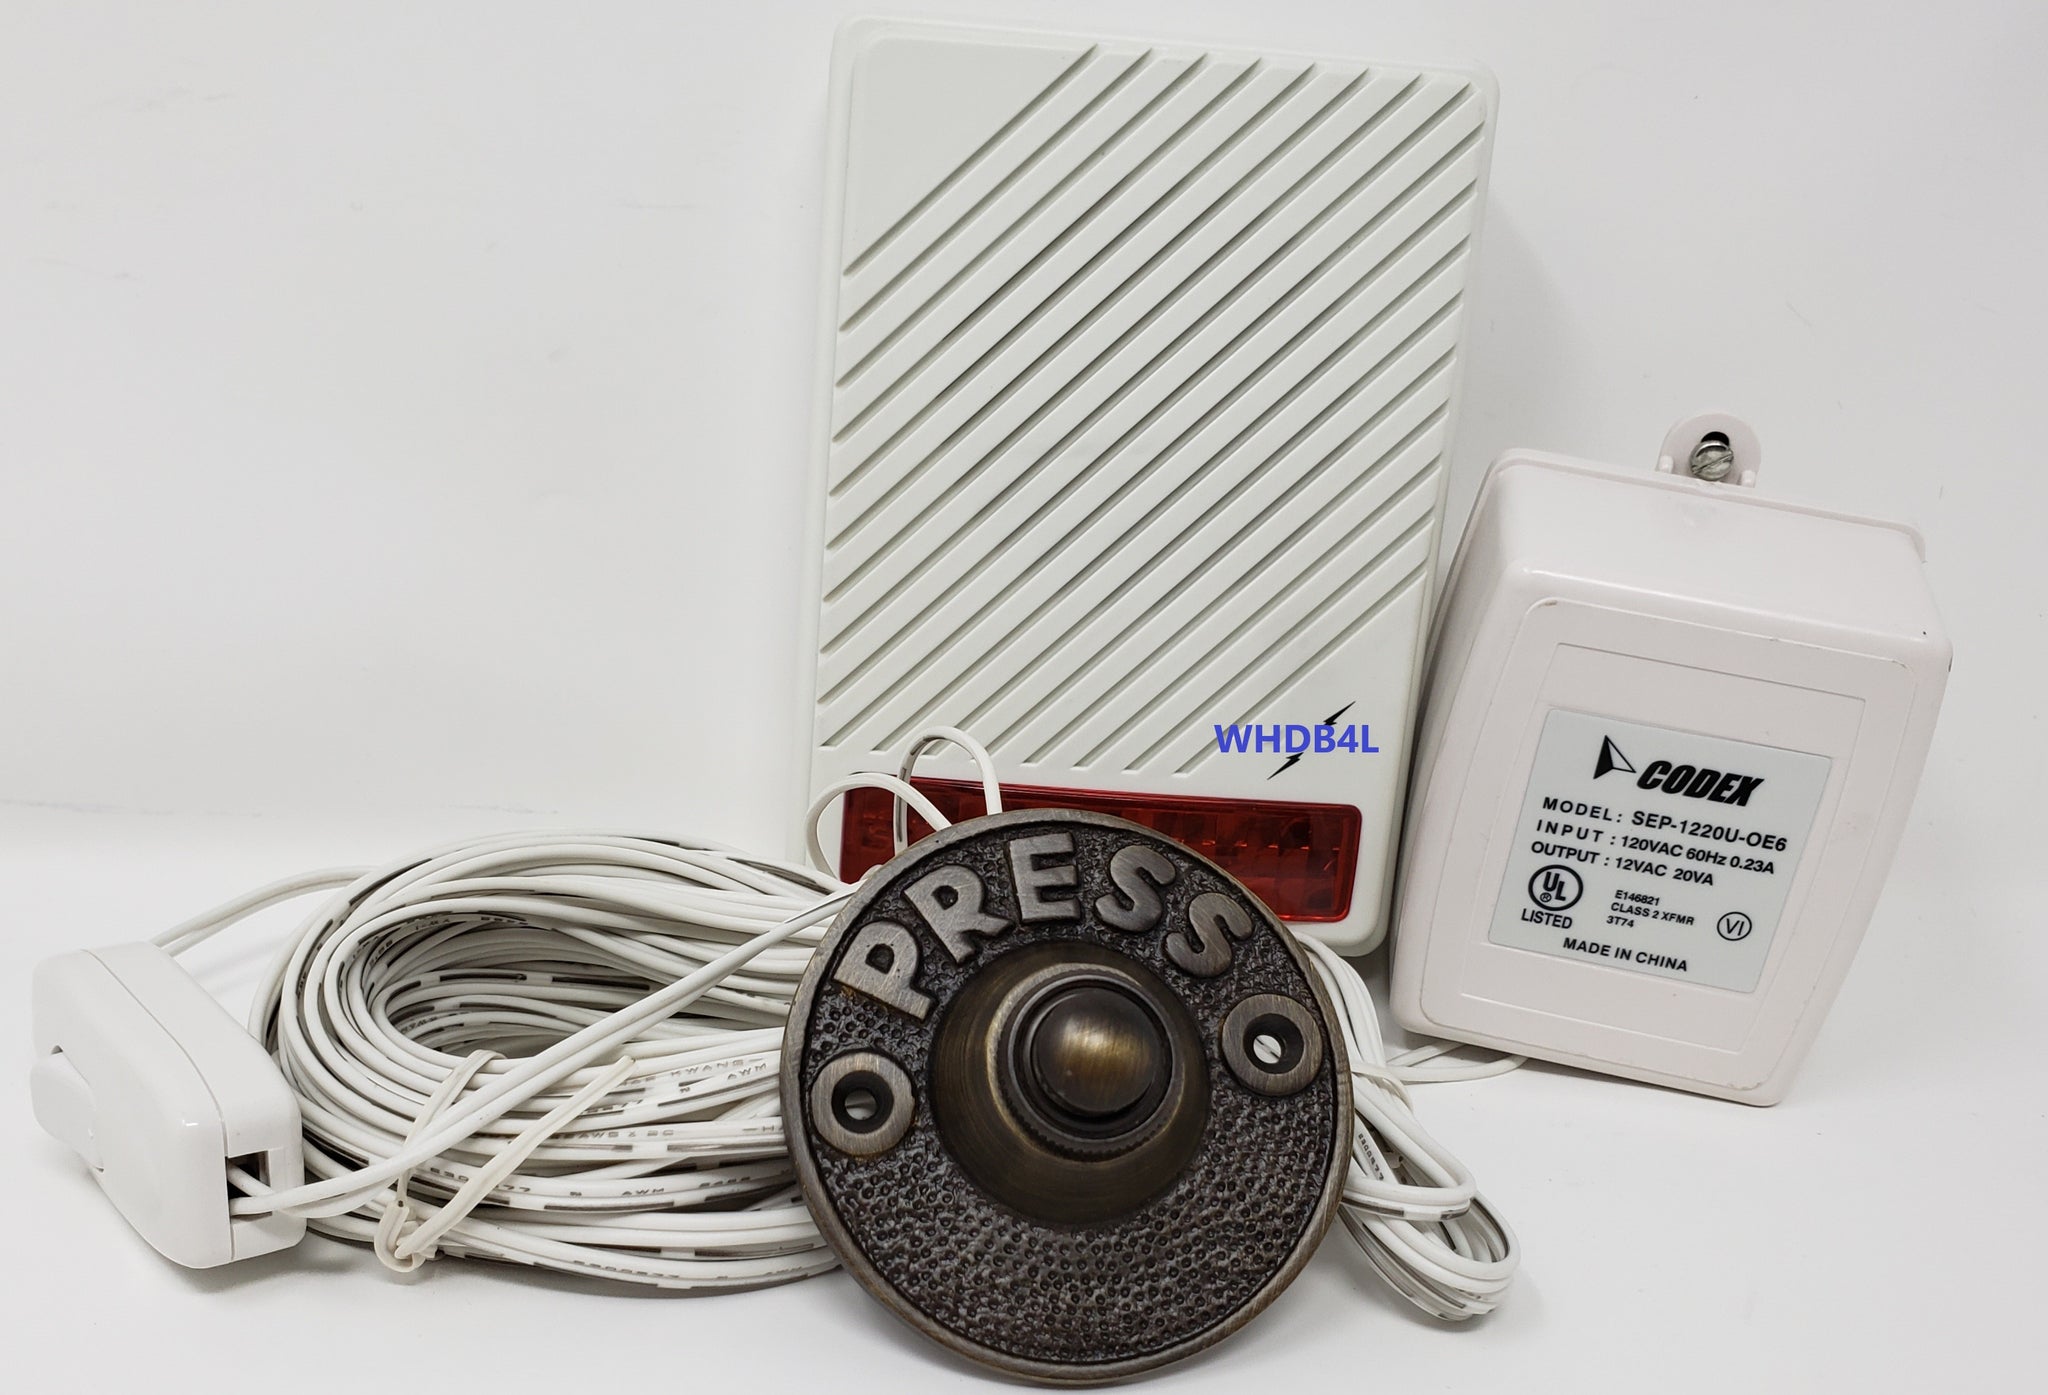 Warehouse Wired  Doorbell ( WHDB4L )